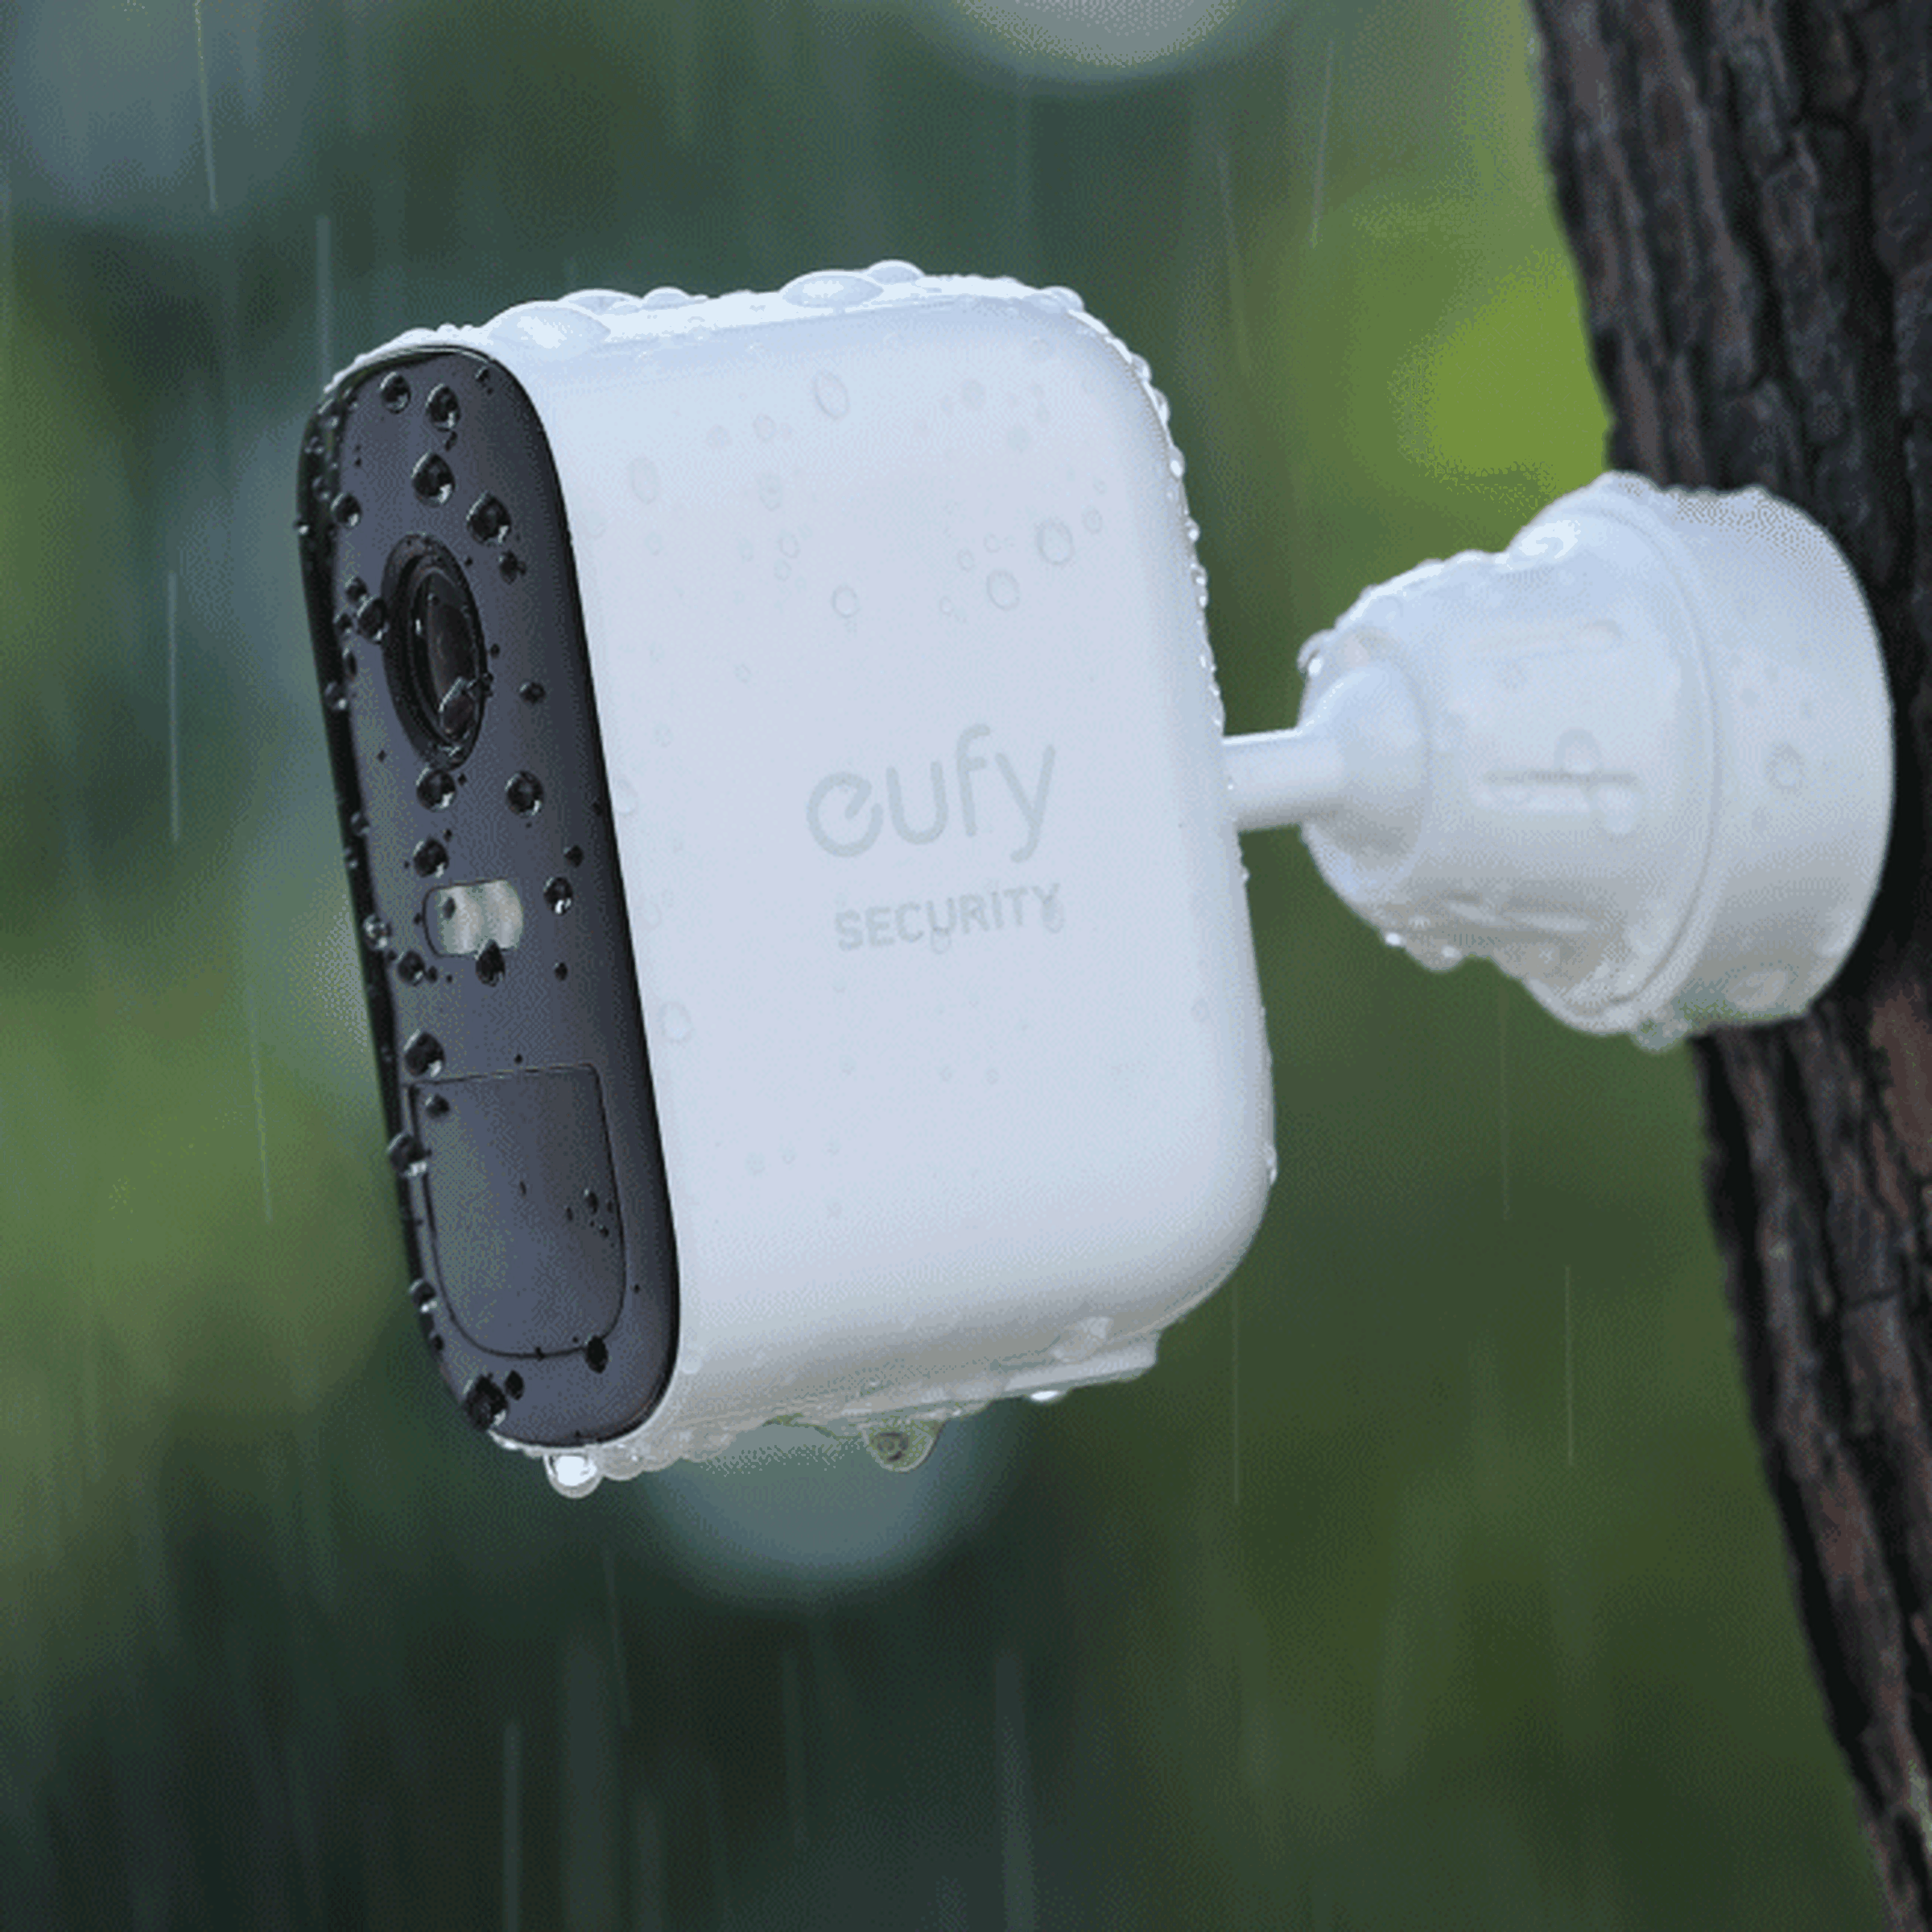 A Eufy security camera, from Anker.